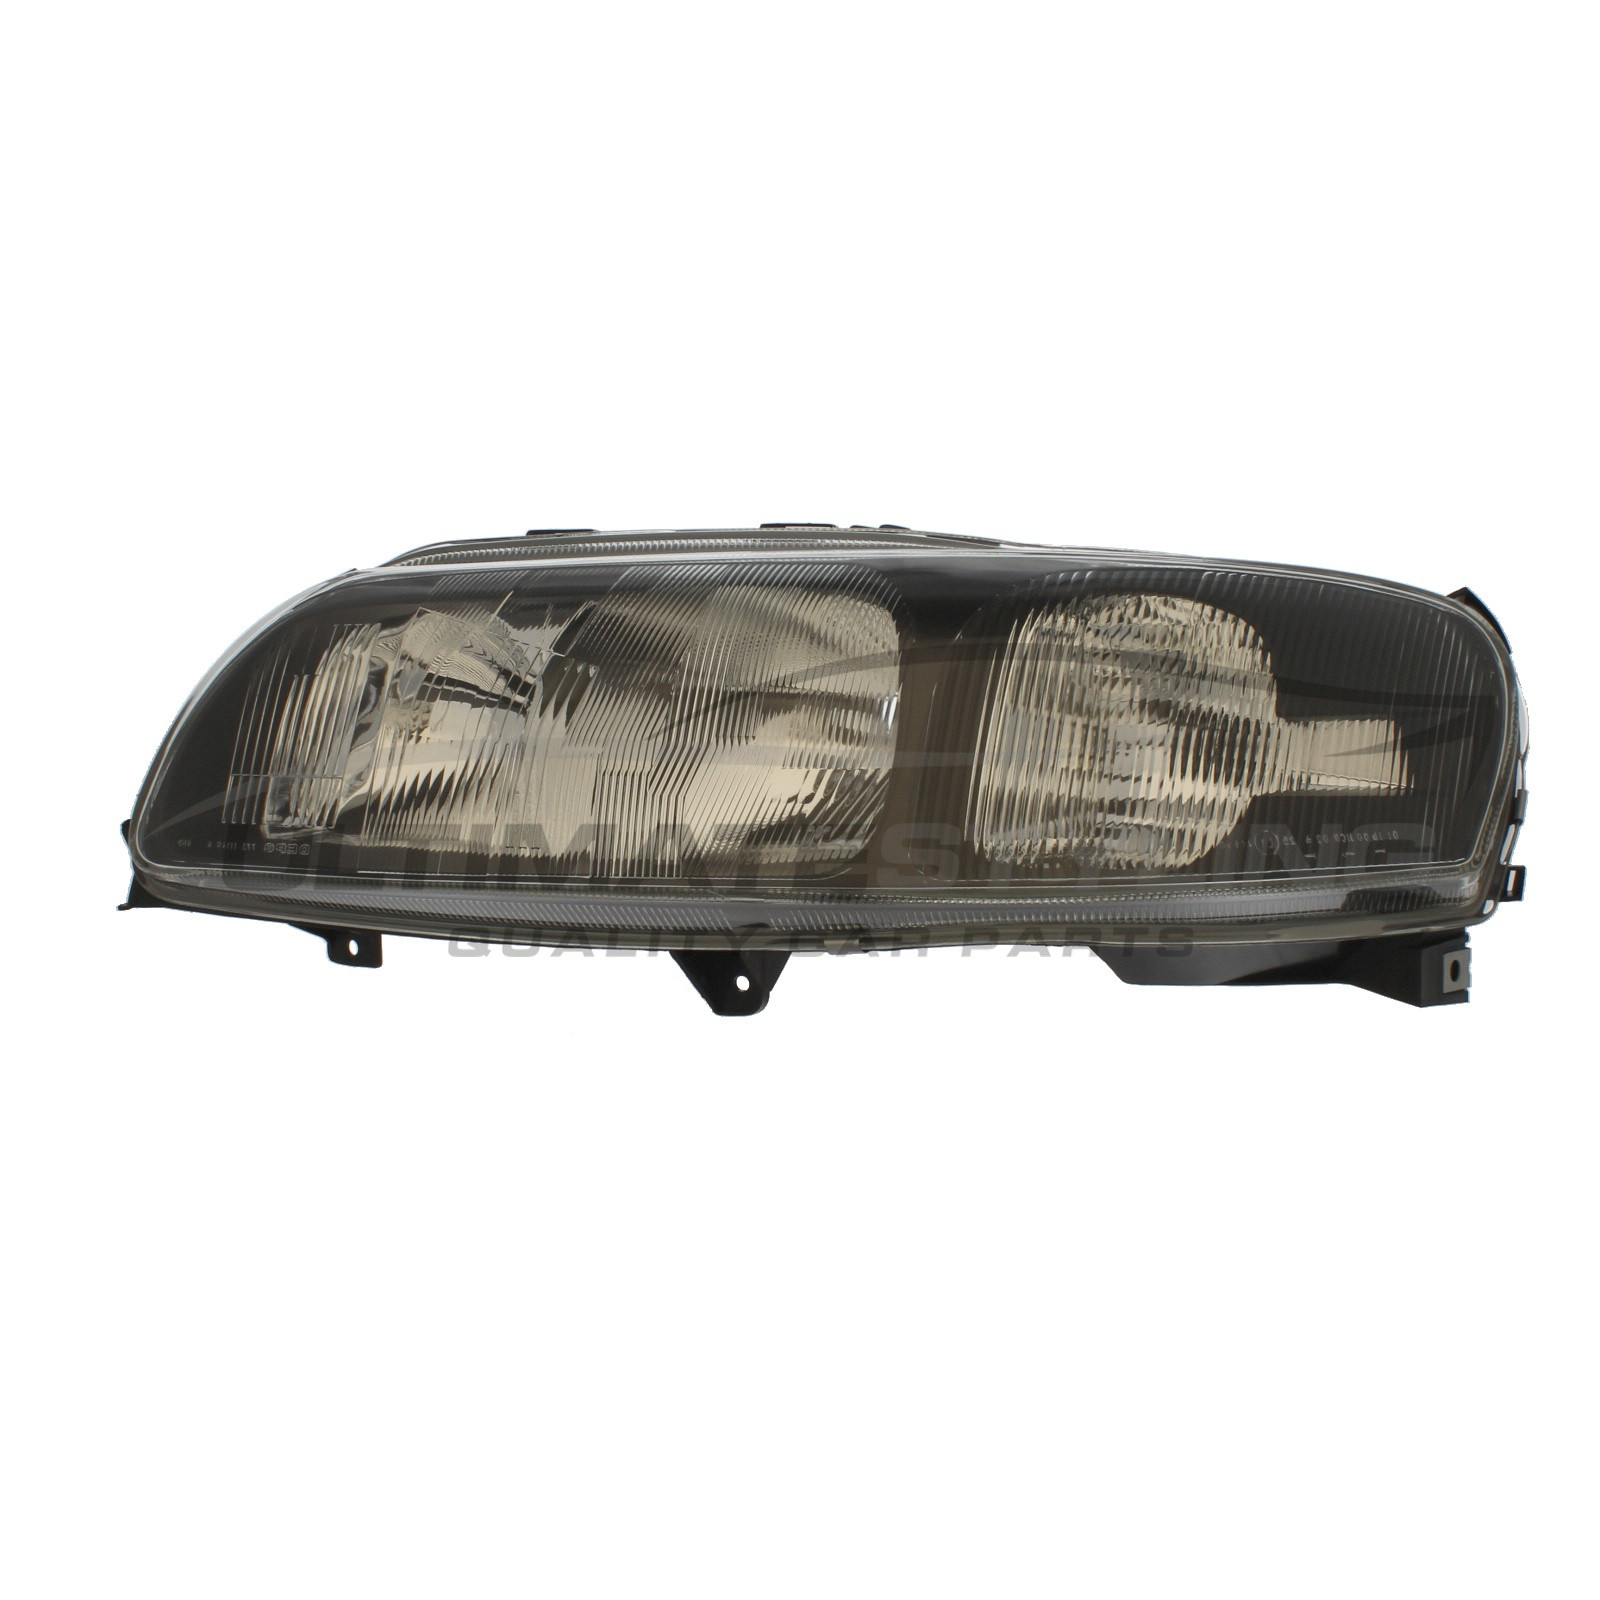 Volvo V70 2000-2005, XC70 2000-2005 Halogen, Electric Without Motor, Black  Surround Headlight / Headlamp with Black Surround Including Clear Indicator 